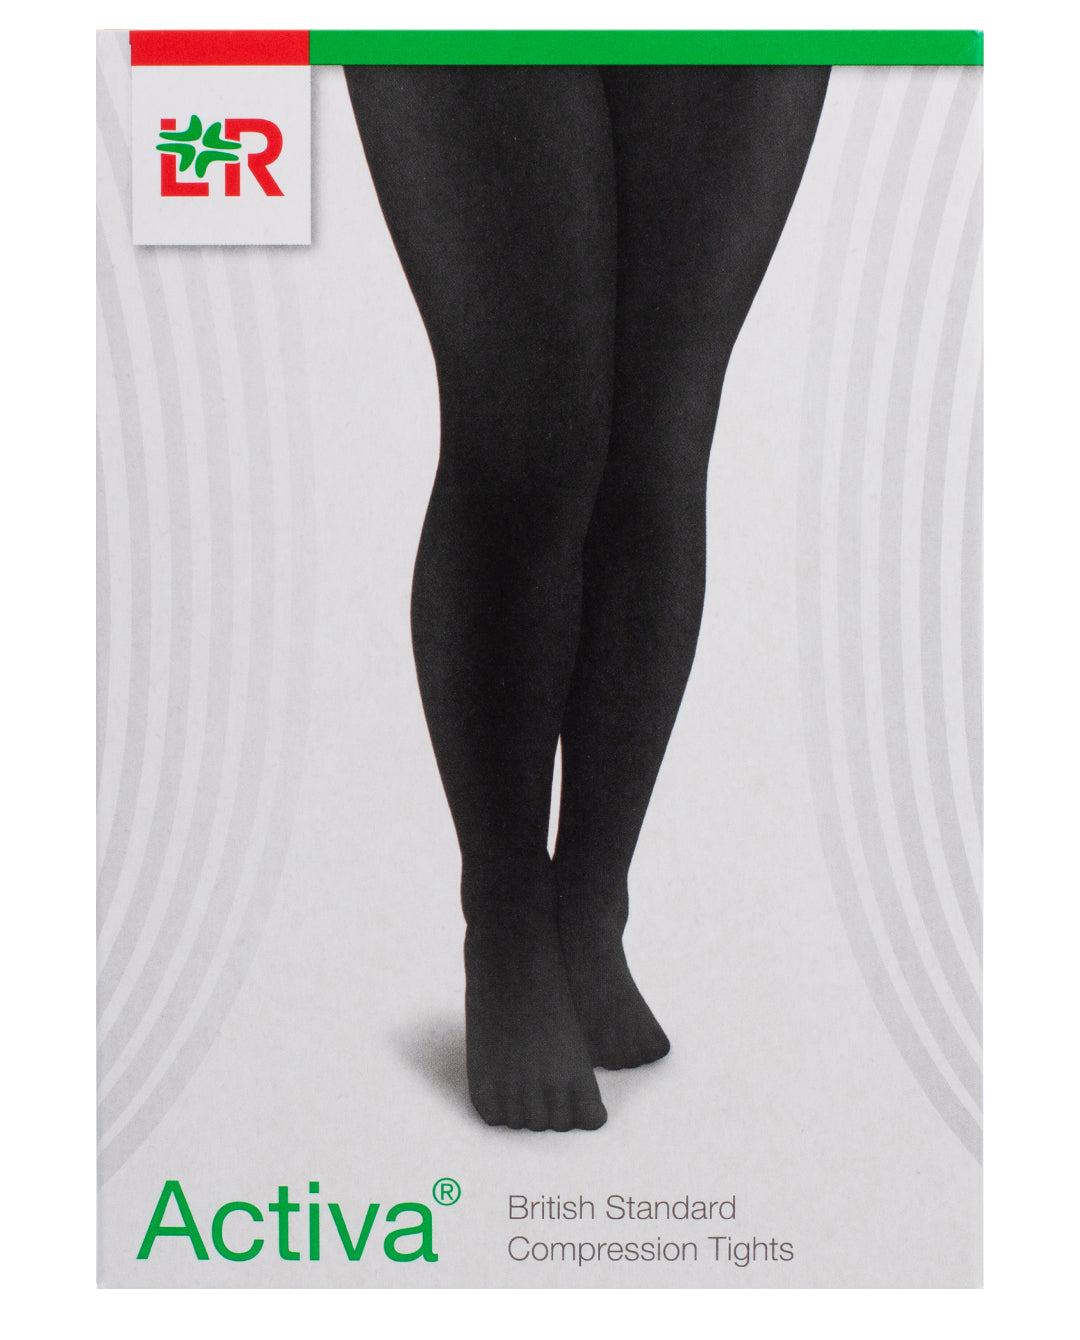 Activa CLASS 1 Below Knee Compression Hoisery (14-17mmHg) - MedicalDressings